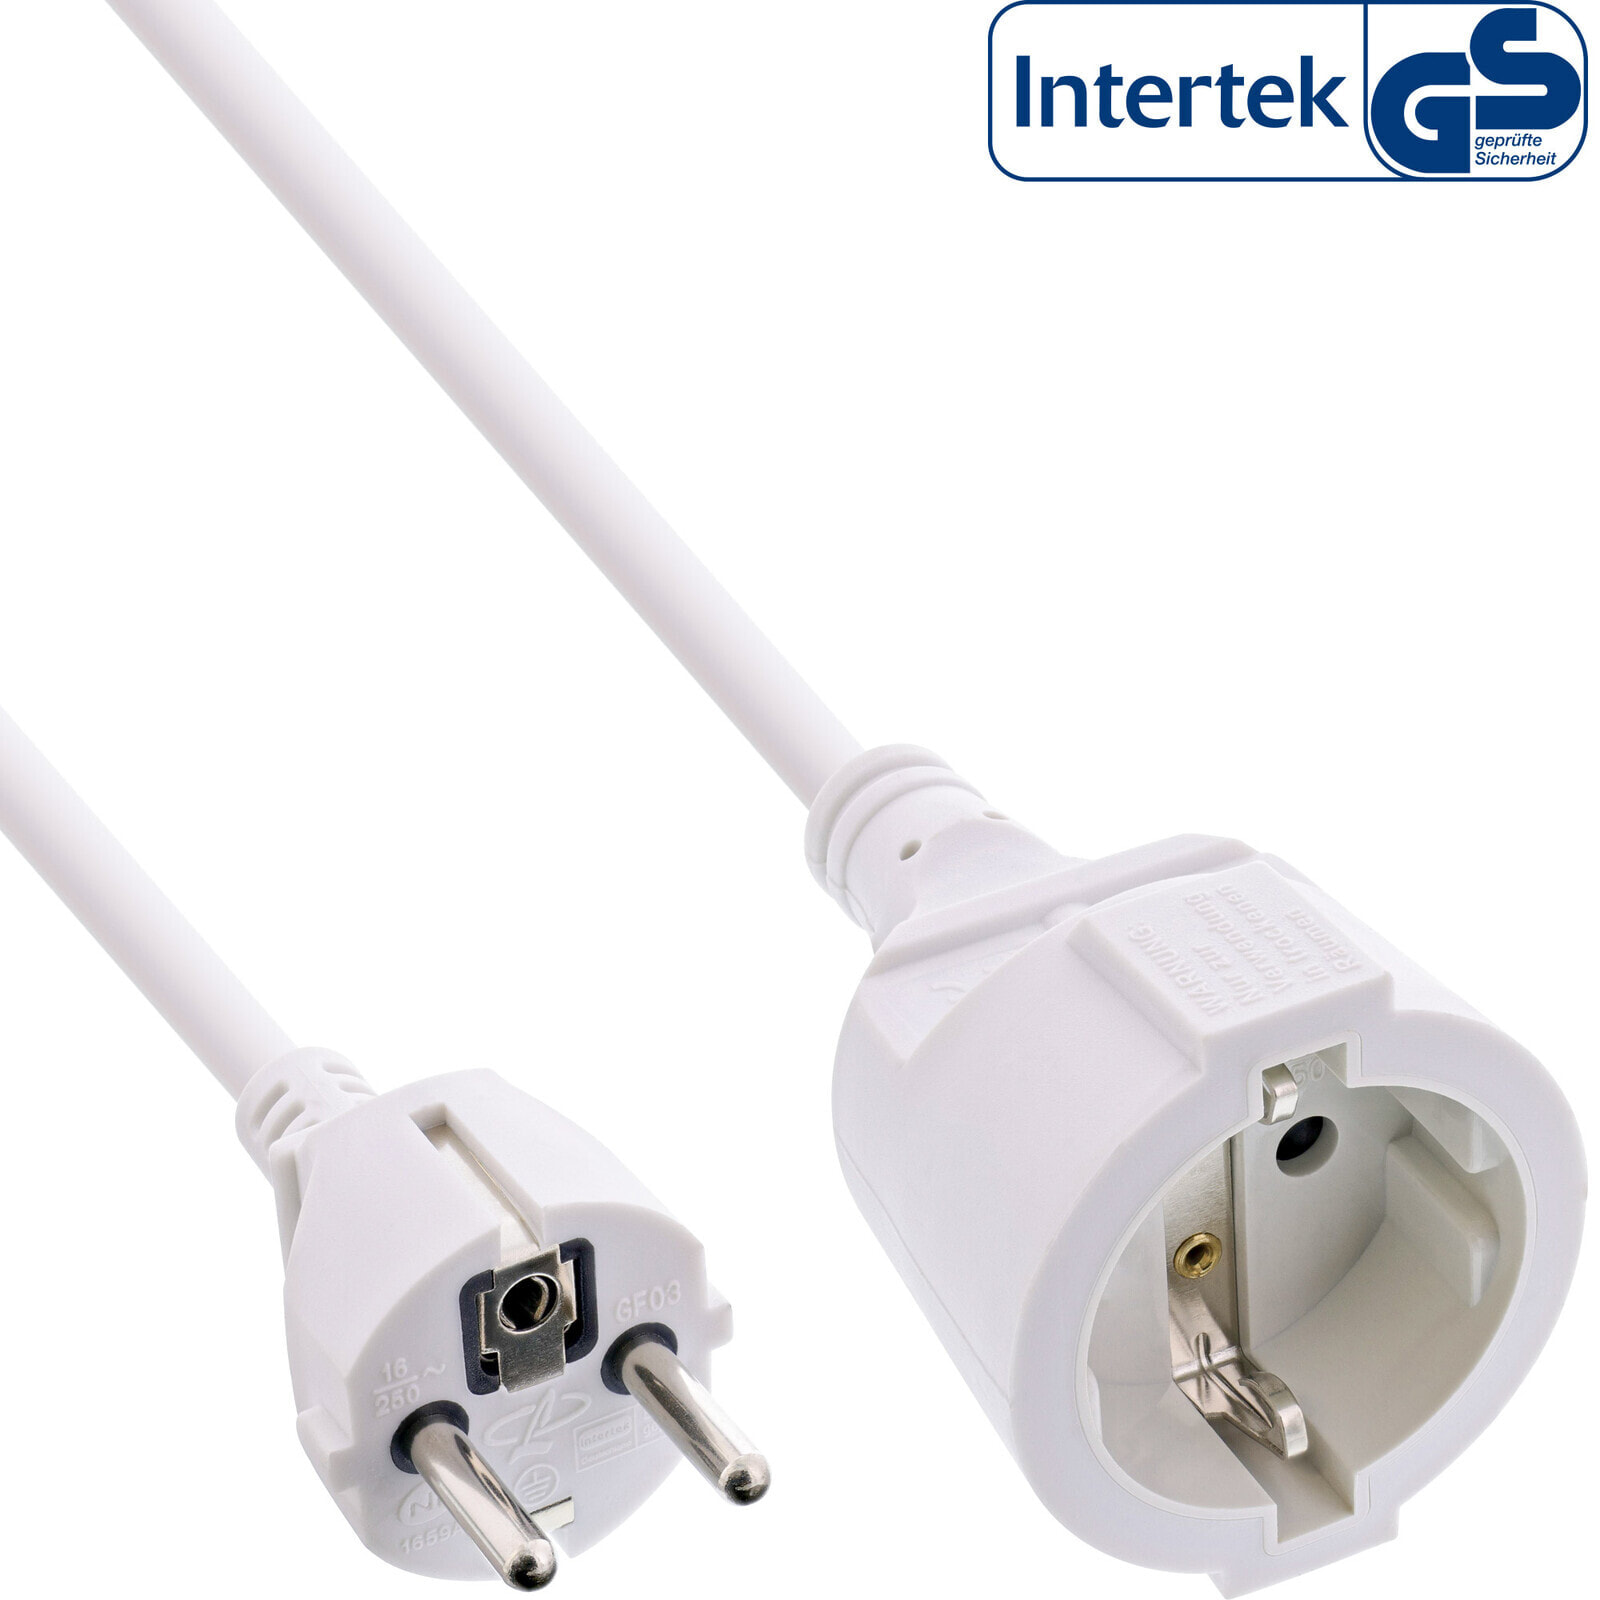 InLine Power extension cable - white - 10m